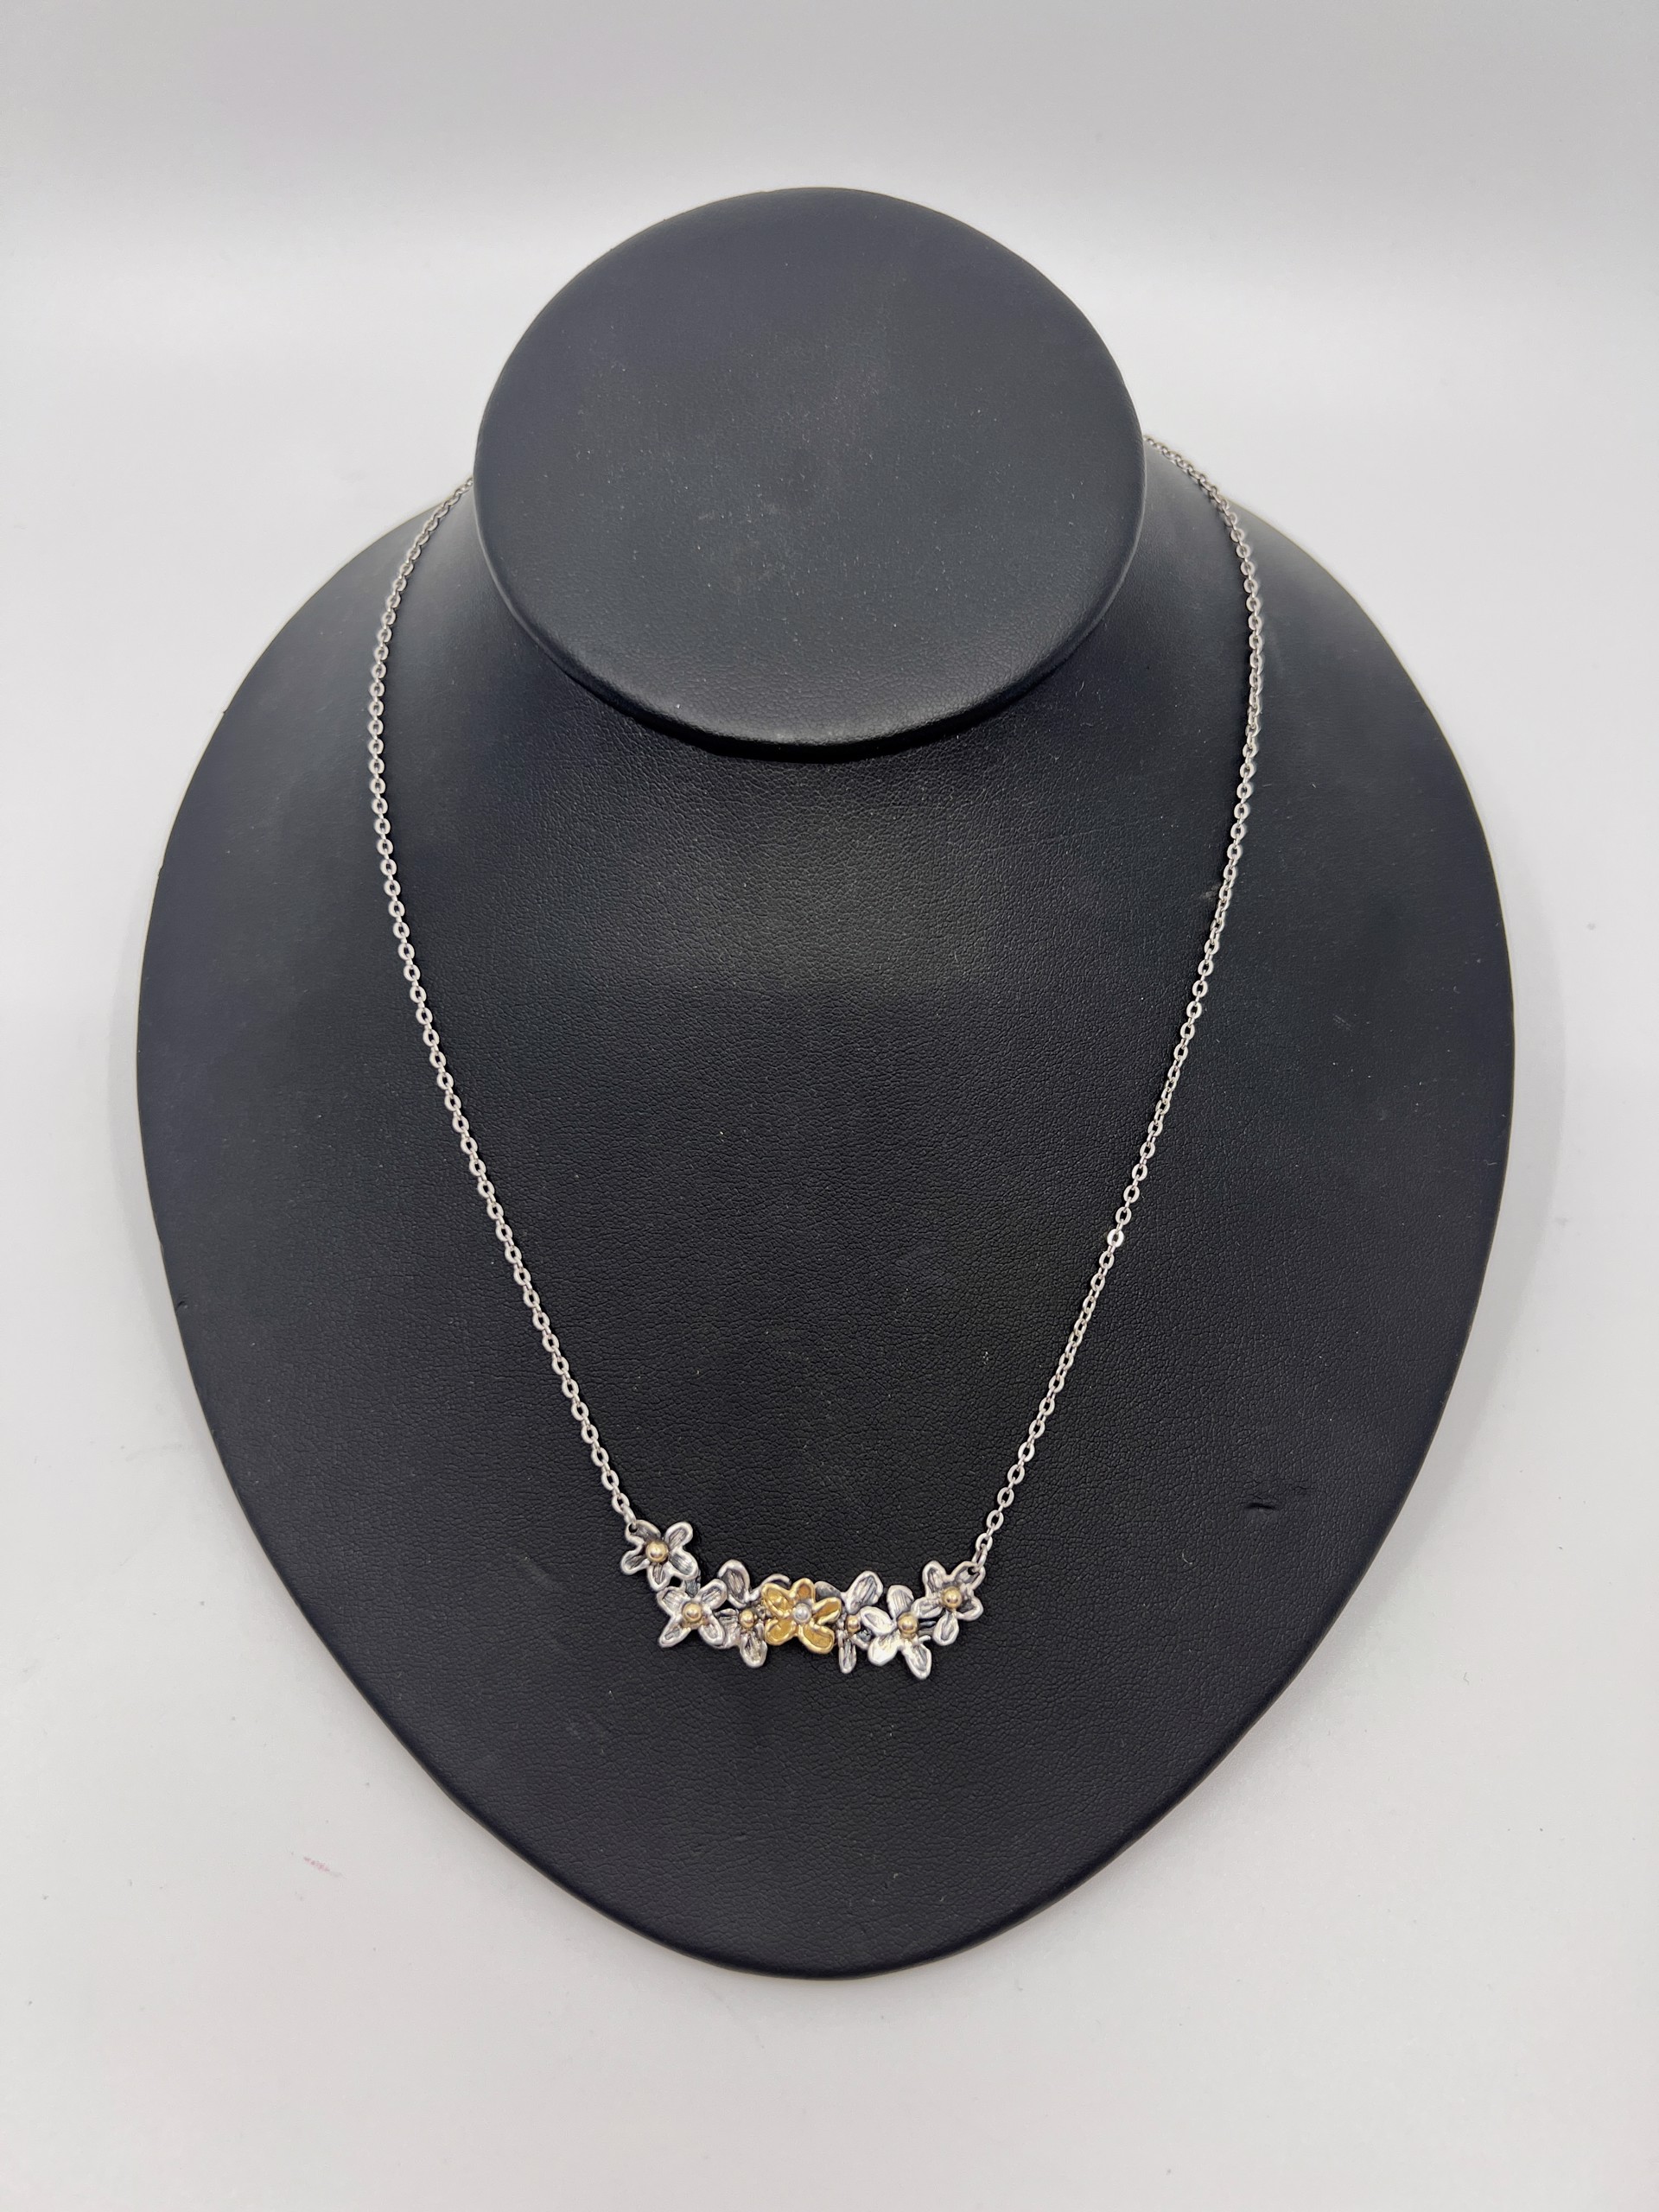 9601 Silver Flower Necklace with Gold Center by Beth Benowich